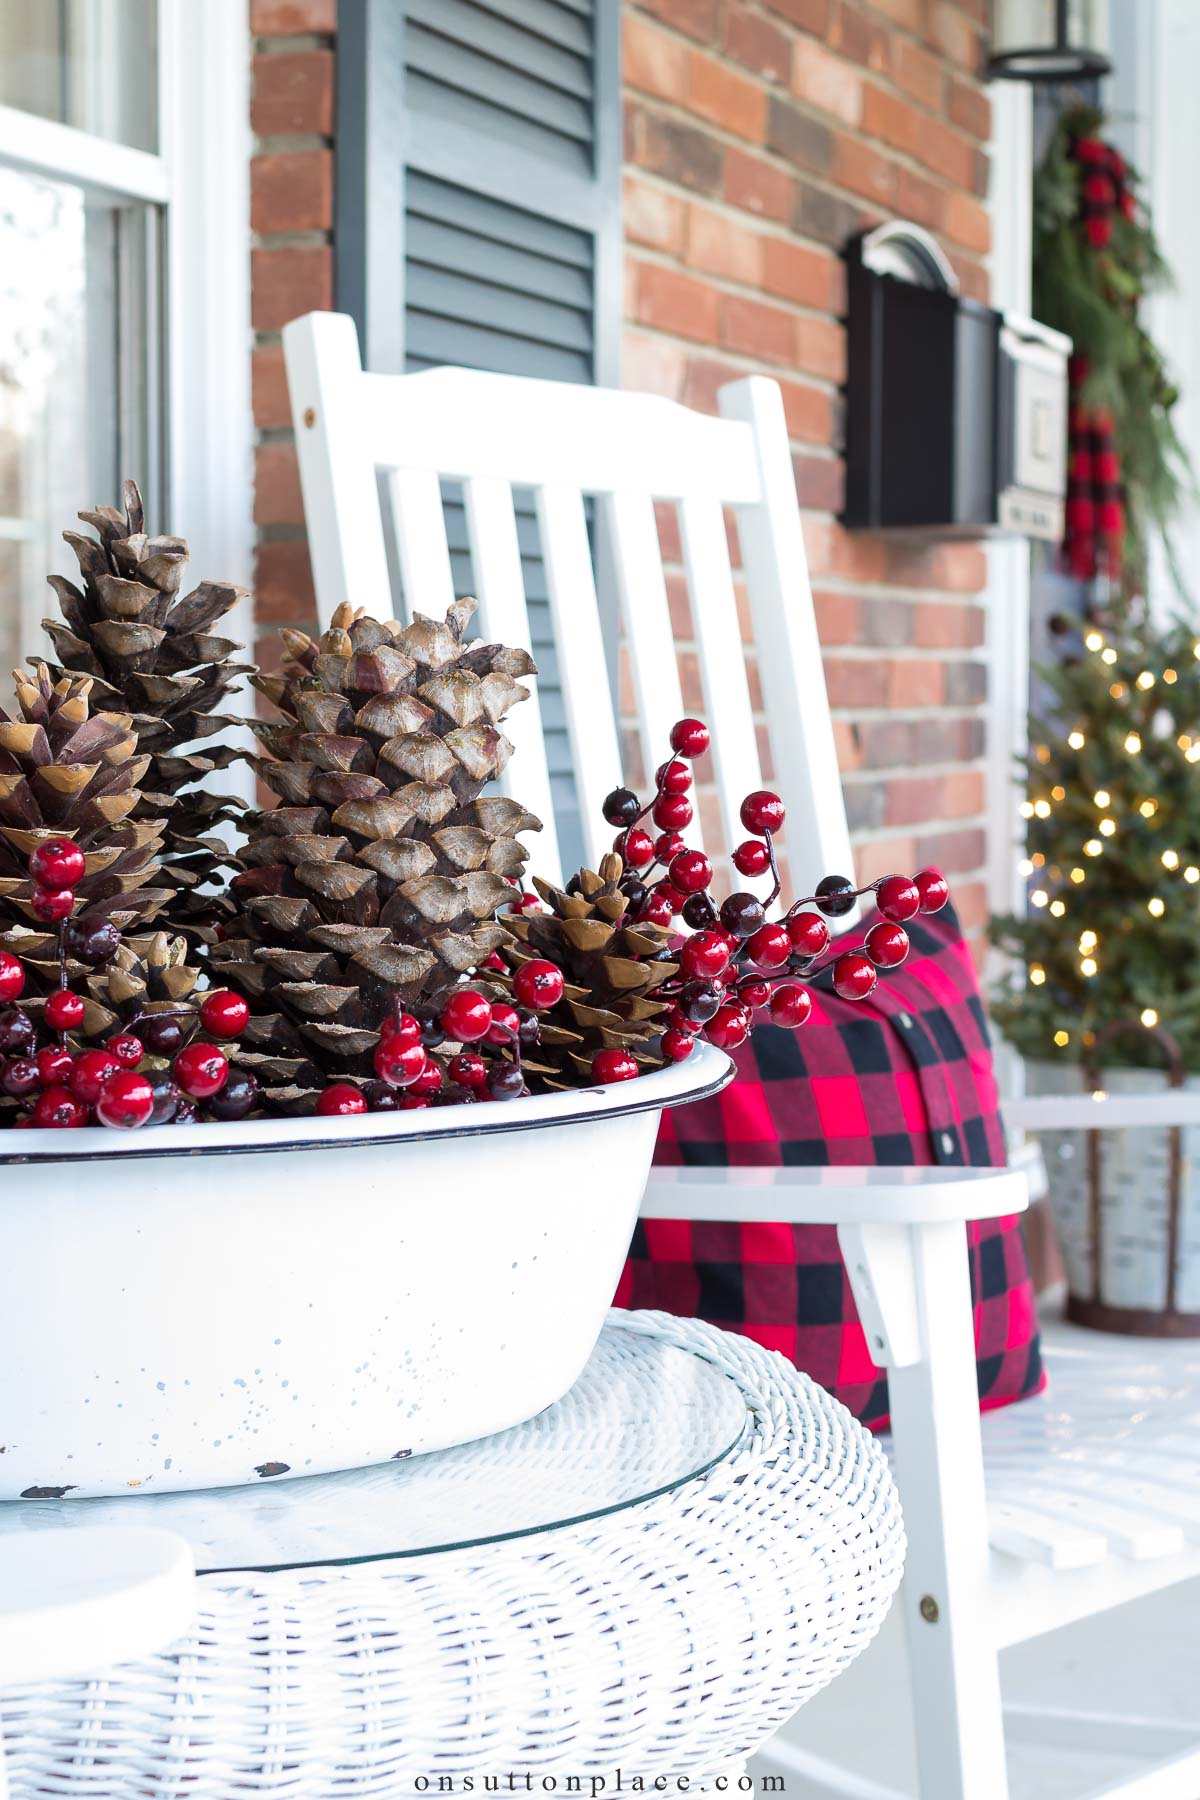 https://www.onsuttonplace.com/wp-content/uploads/2015/12/red-and-black-christmas-porch-decor-2023.jpg